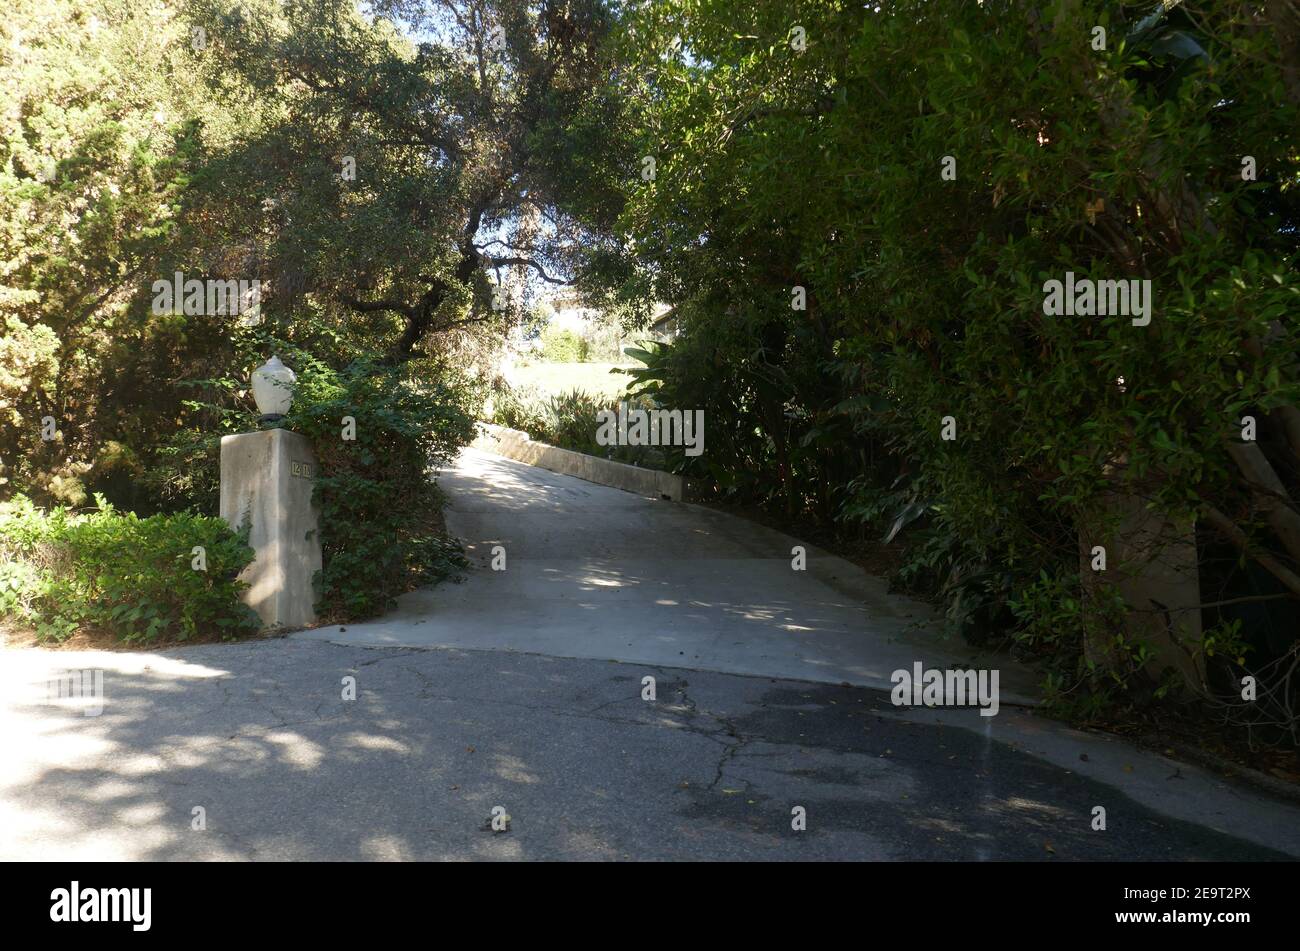 Beverly Hills, California, USA 5th February 2021 A general view of atmosphere of Director Arthur Hiller's former home at 1218 Benedict Canyon Drive on February 5, 2021 in Beverly Hills, California, USA. Photo by Barry King/Alamy Stock Photo Stock Photo